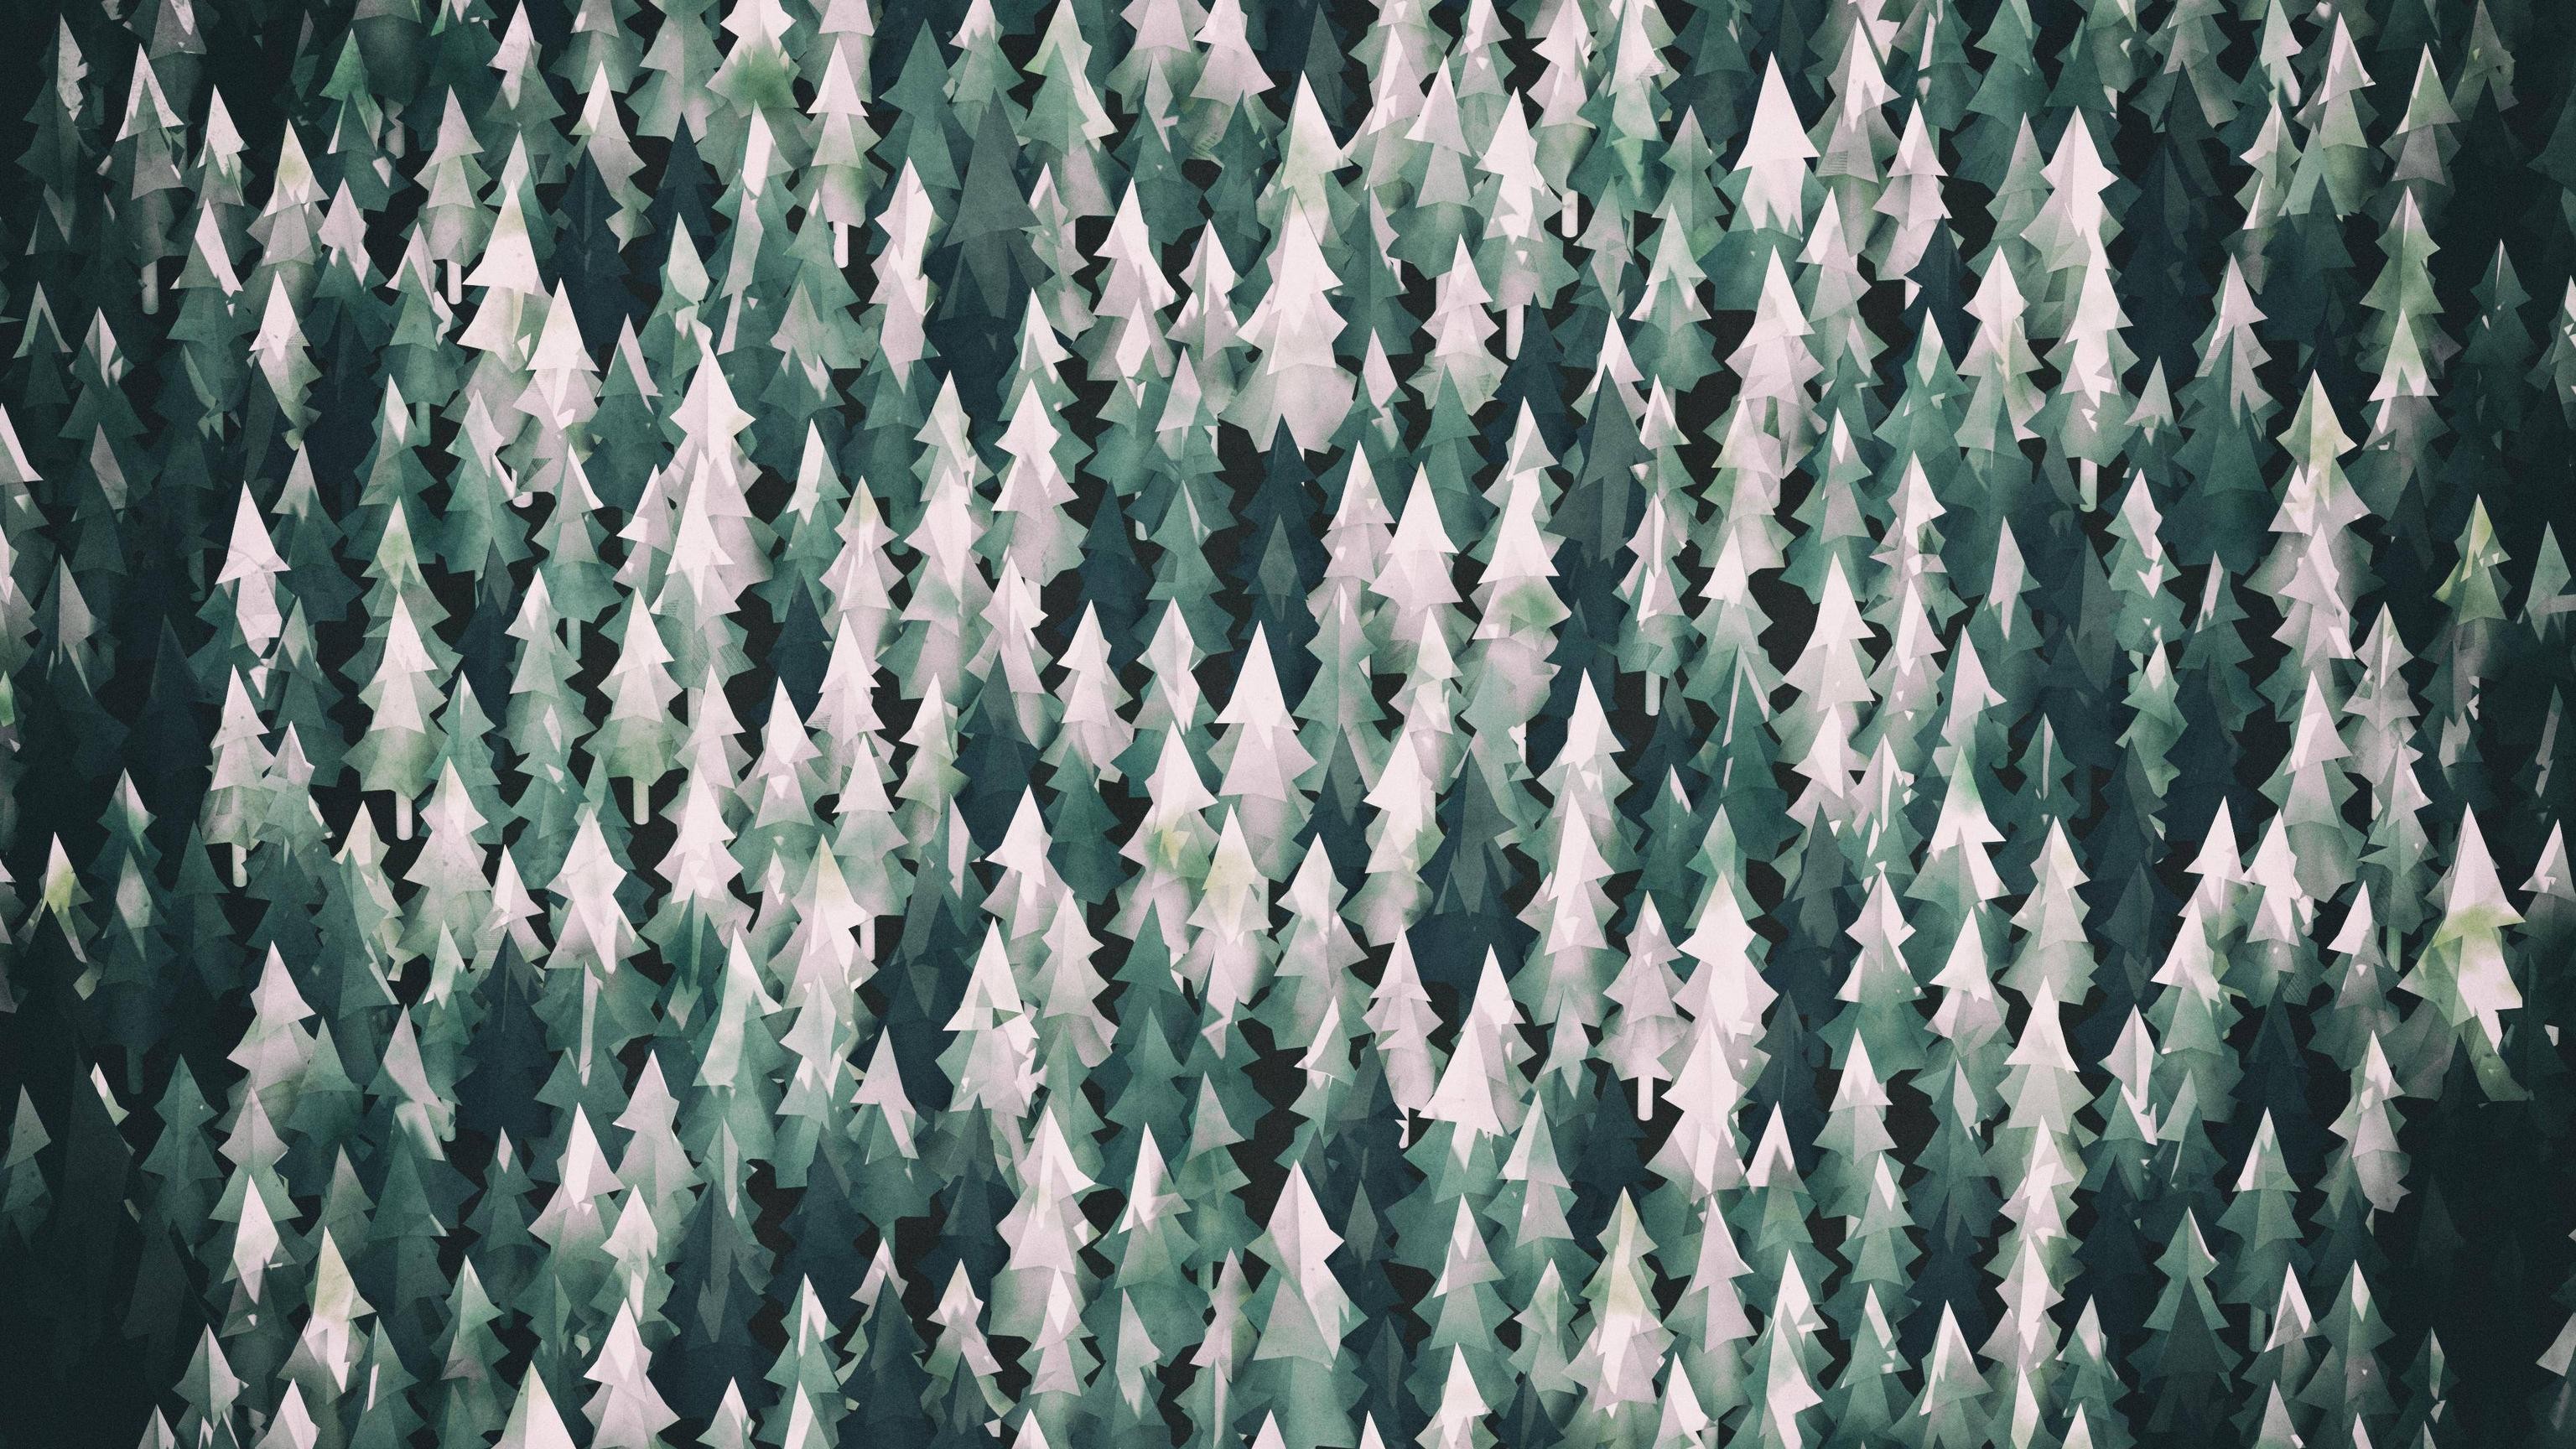 General 3072x1728 forest abstract digital art nature trees plants